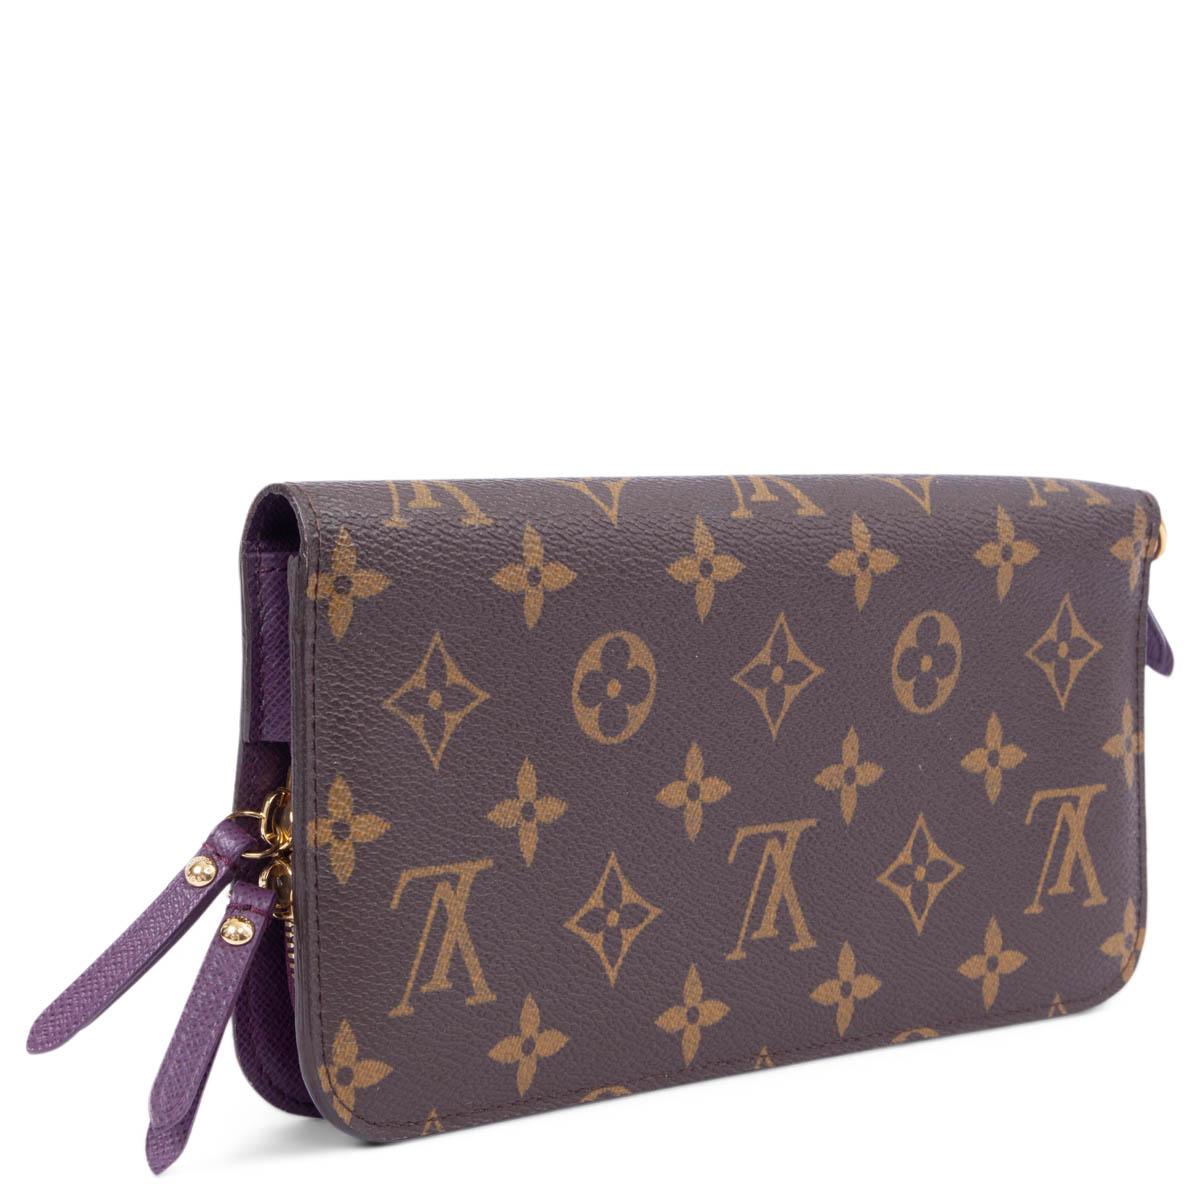 100% authentic Louis Vuitton Insolite Monogram Canvas wallet in brown featuring gold-tone hardware. Opens with push-buttons to a purple lined interior with twelve credit card slots, two bill compartments and two zipped coin pockets. Has been carried